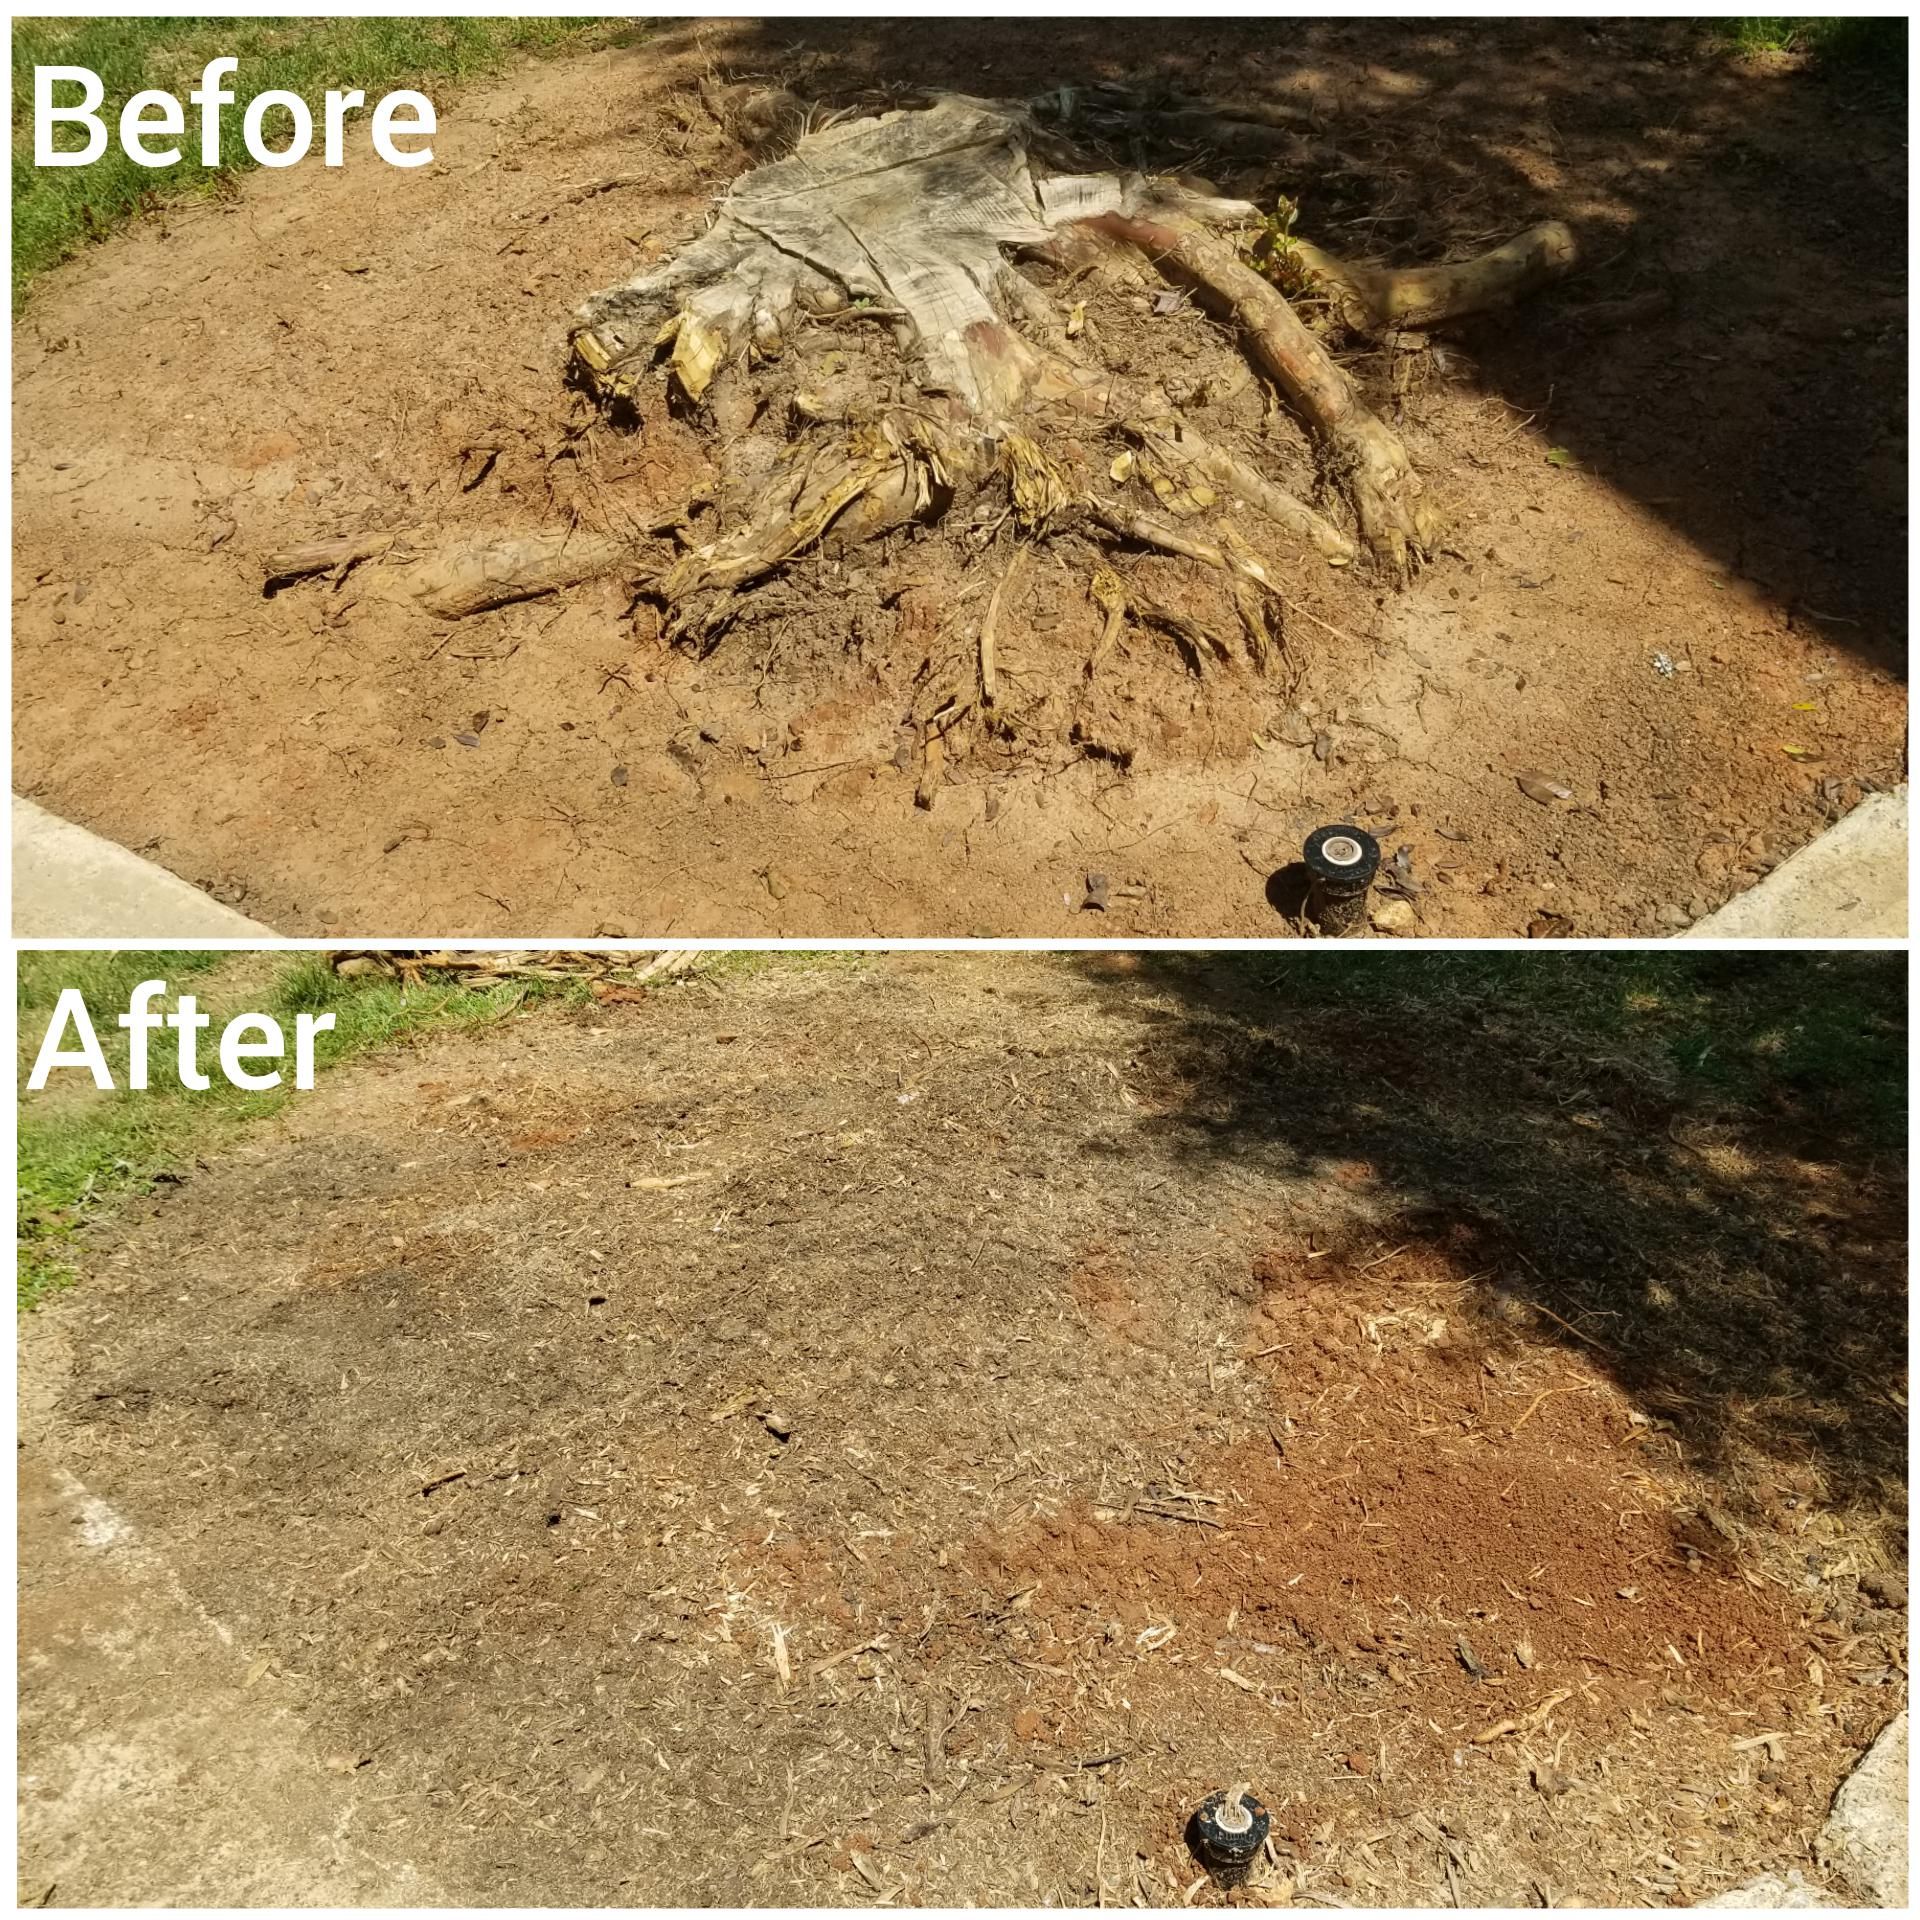 Driveway-Maintenance for Fayette Property Solutions in Fayetteville, GA